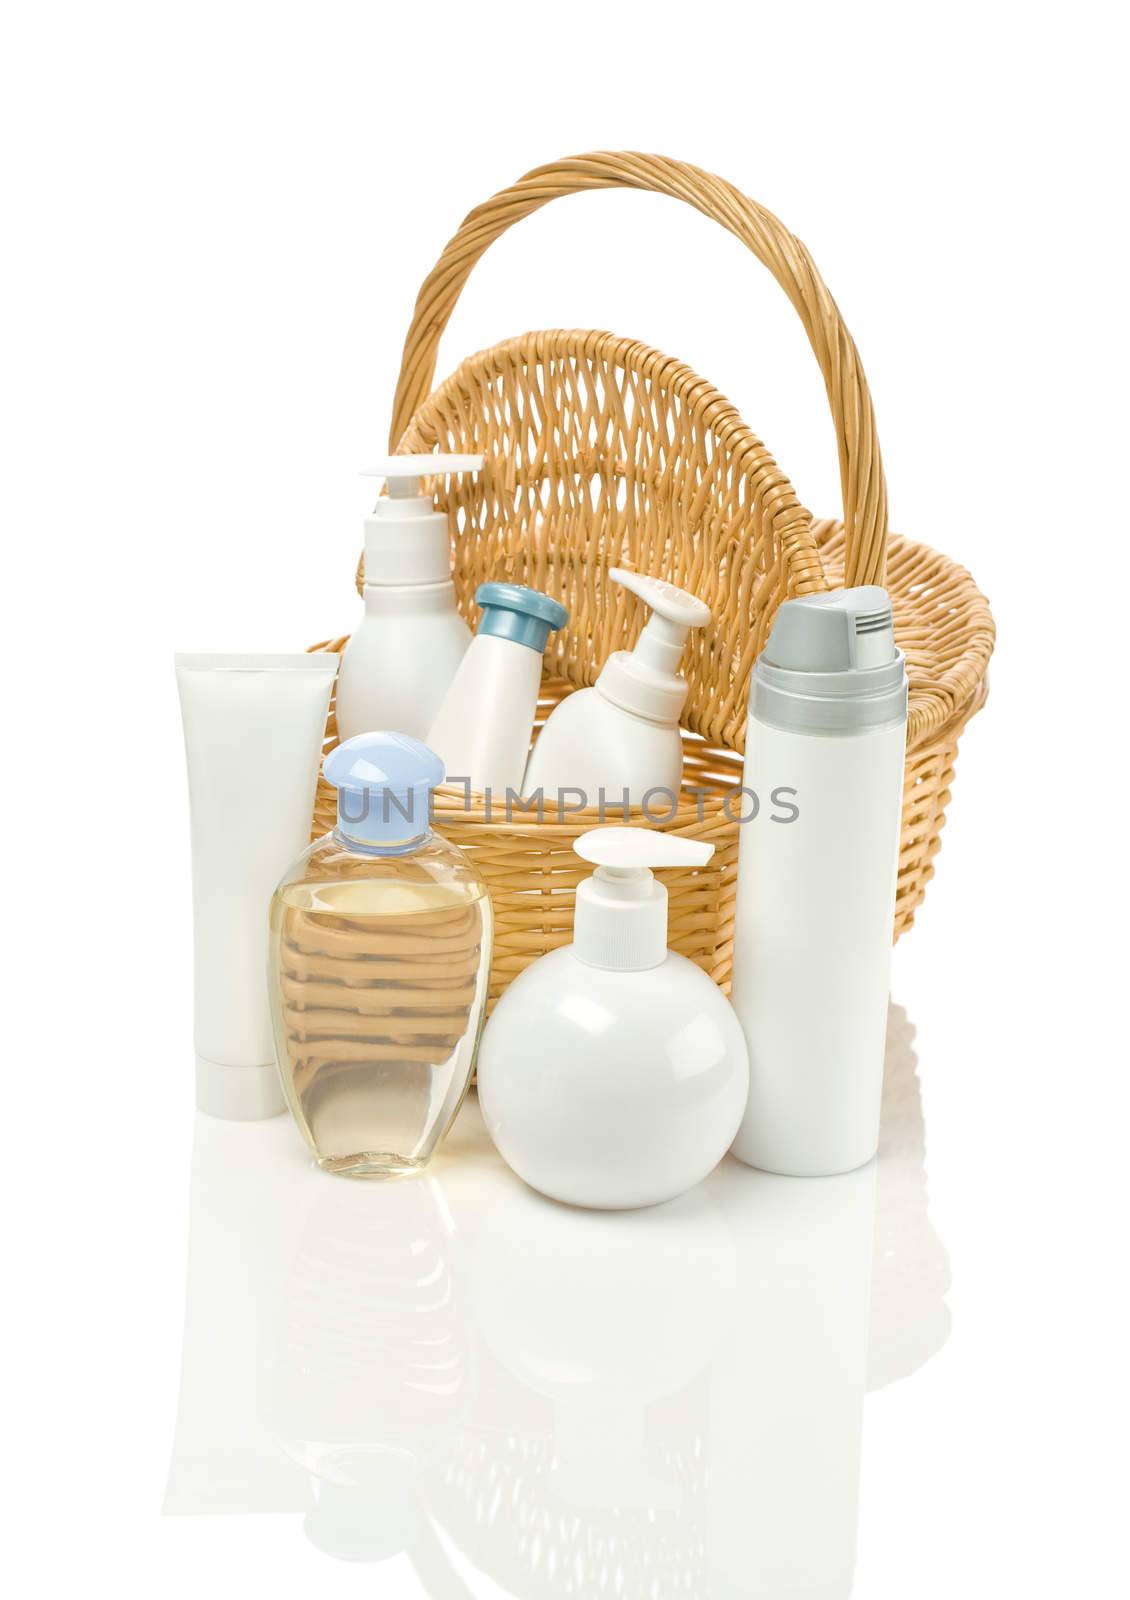 basket full of objects for care